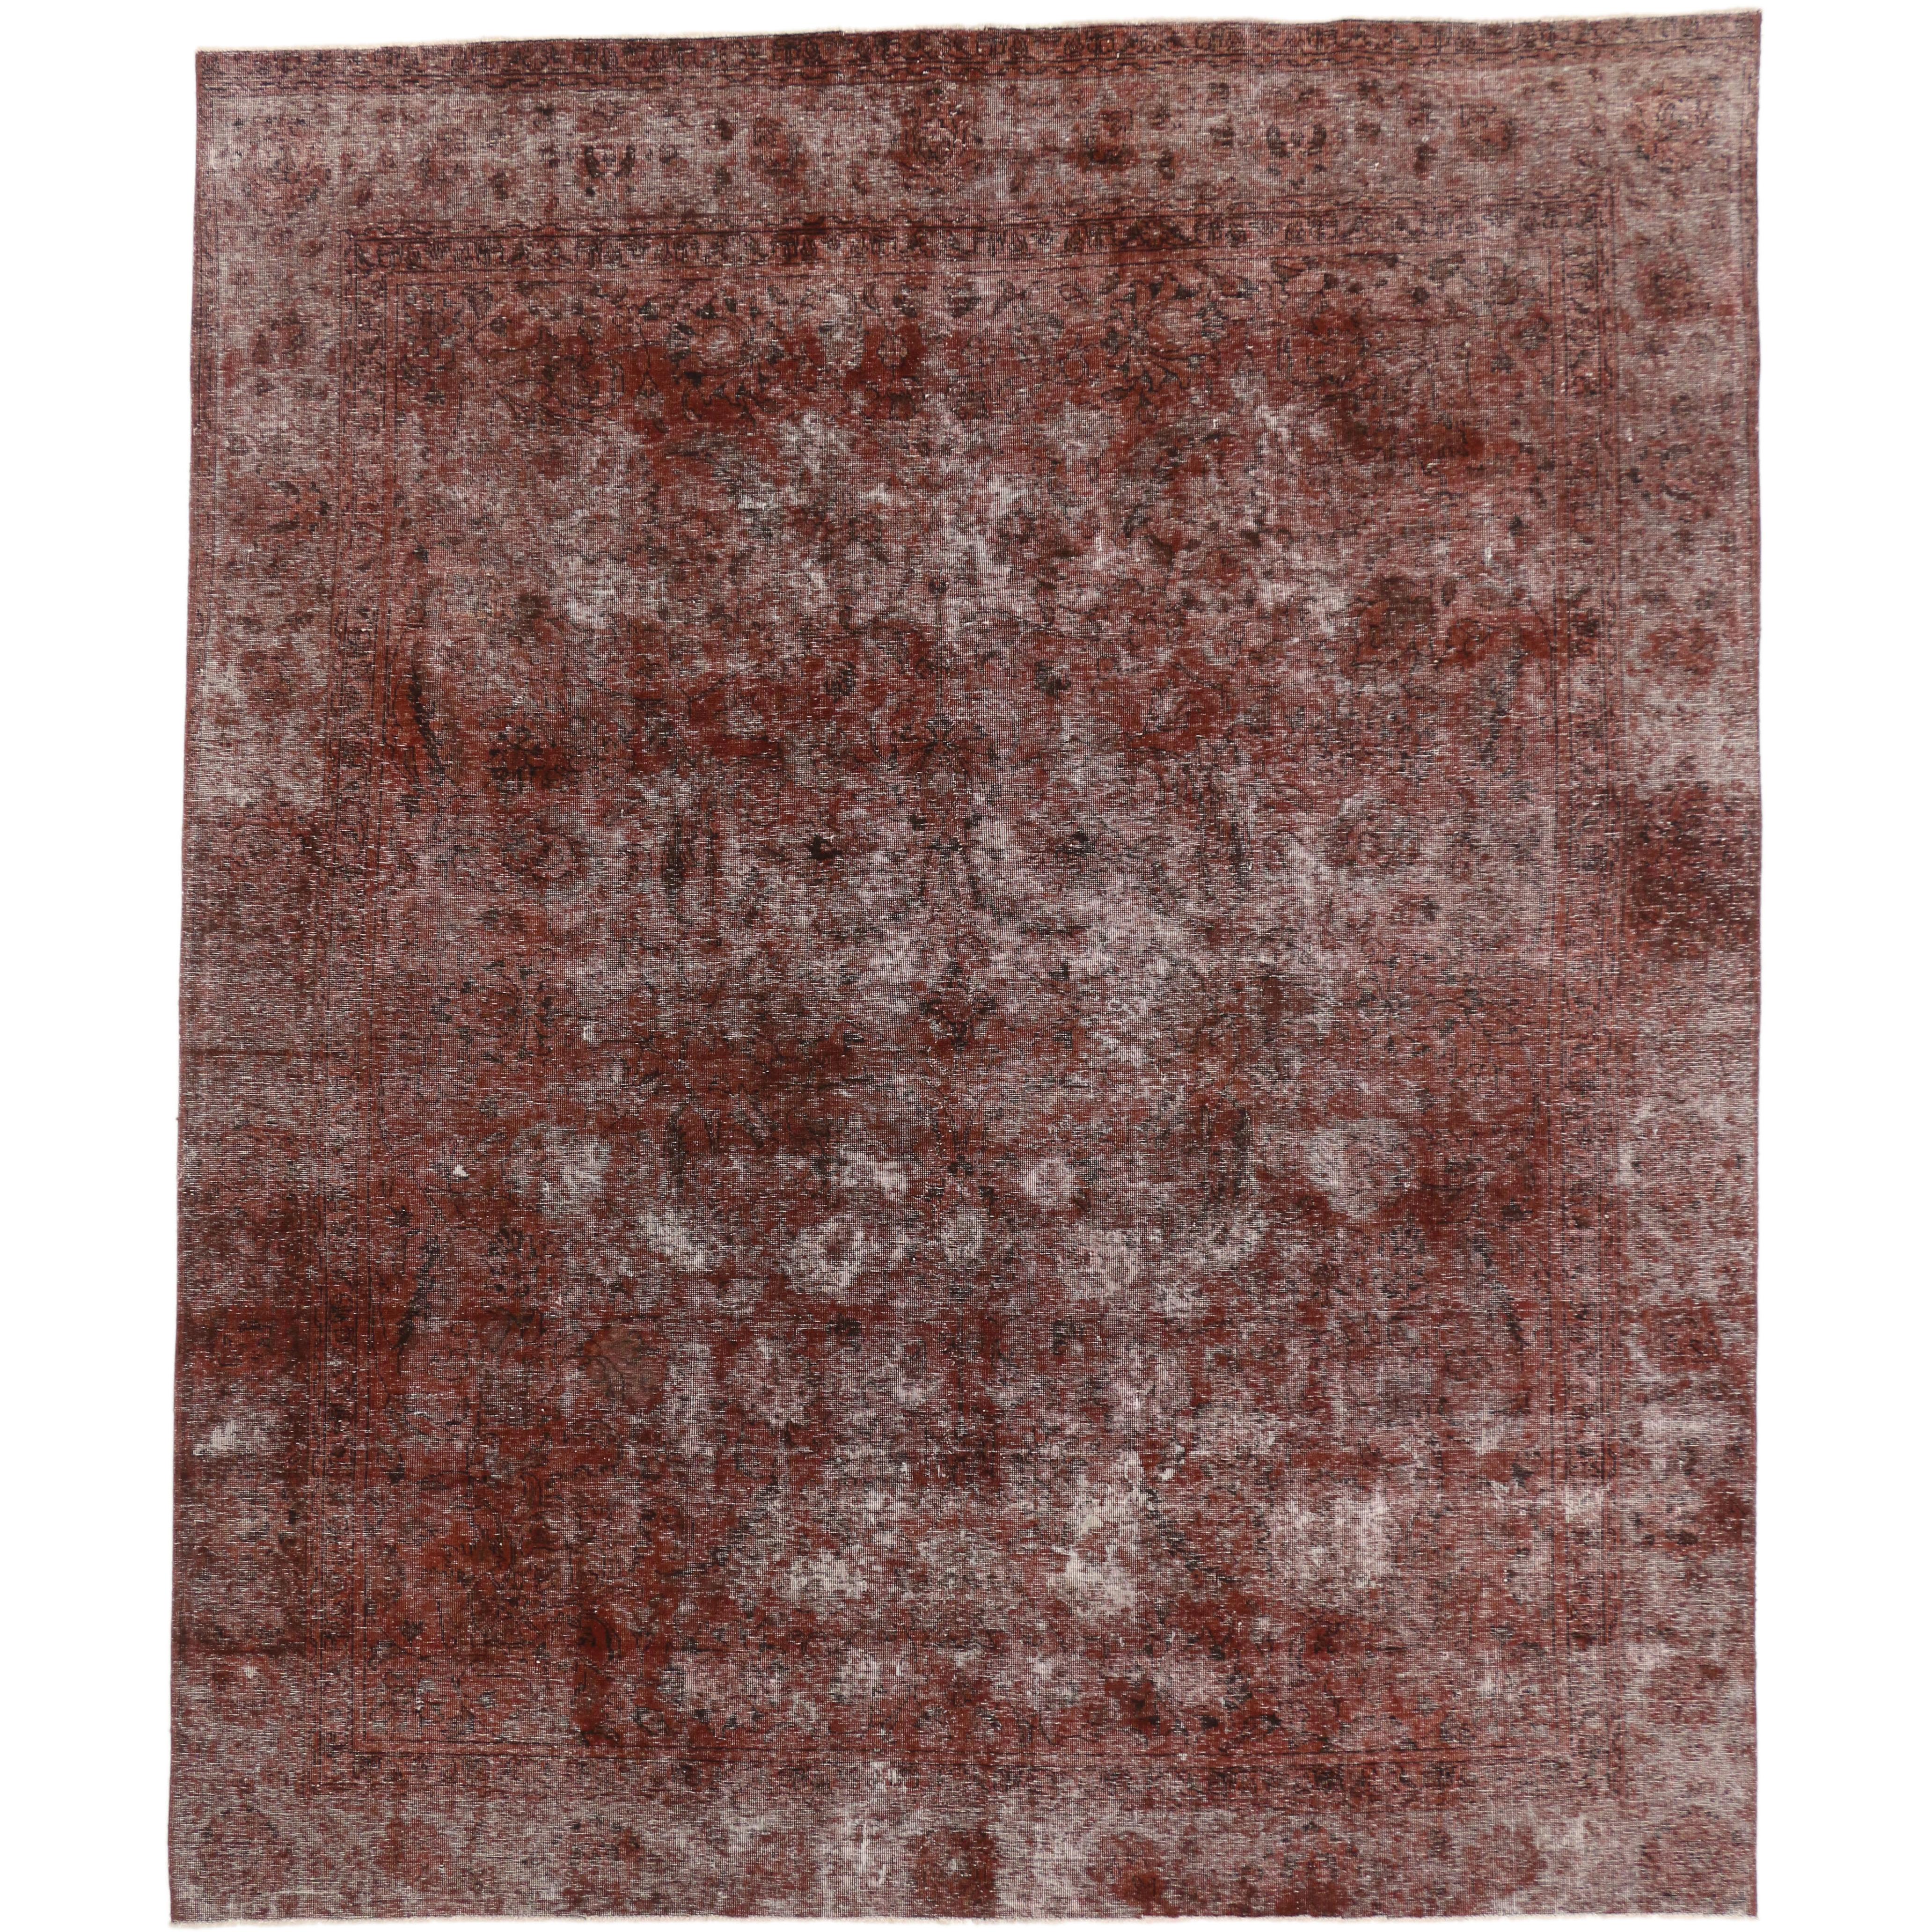 Vintage Turkish Overdyed Rug, Modern Industrial Meets Rustic Spanish Style